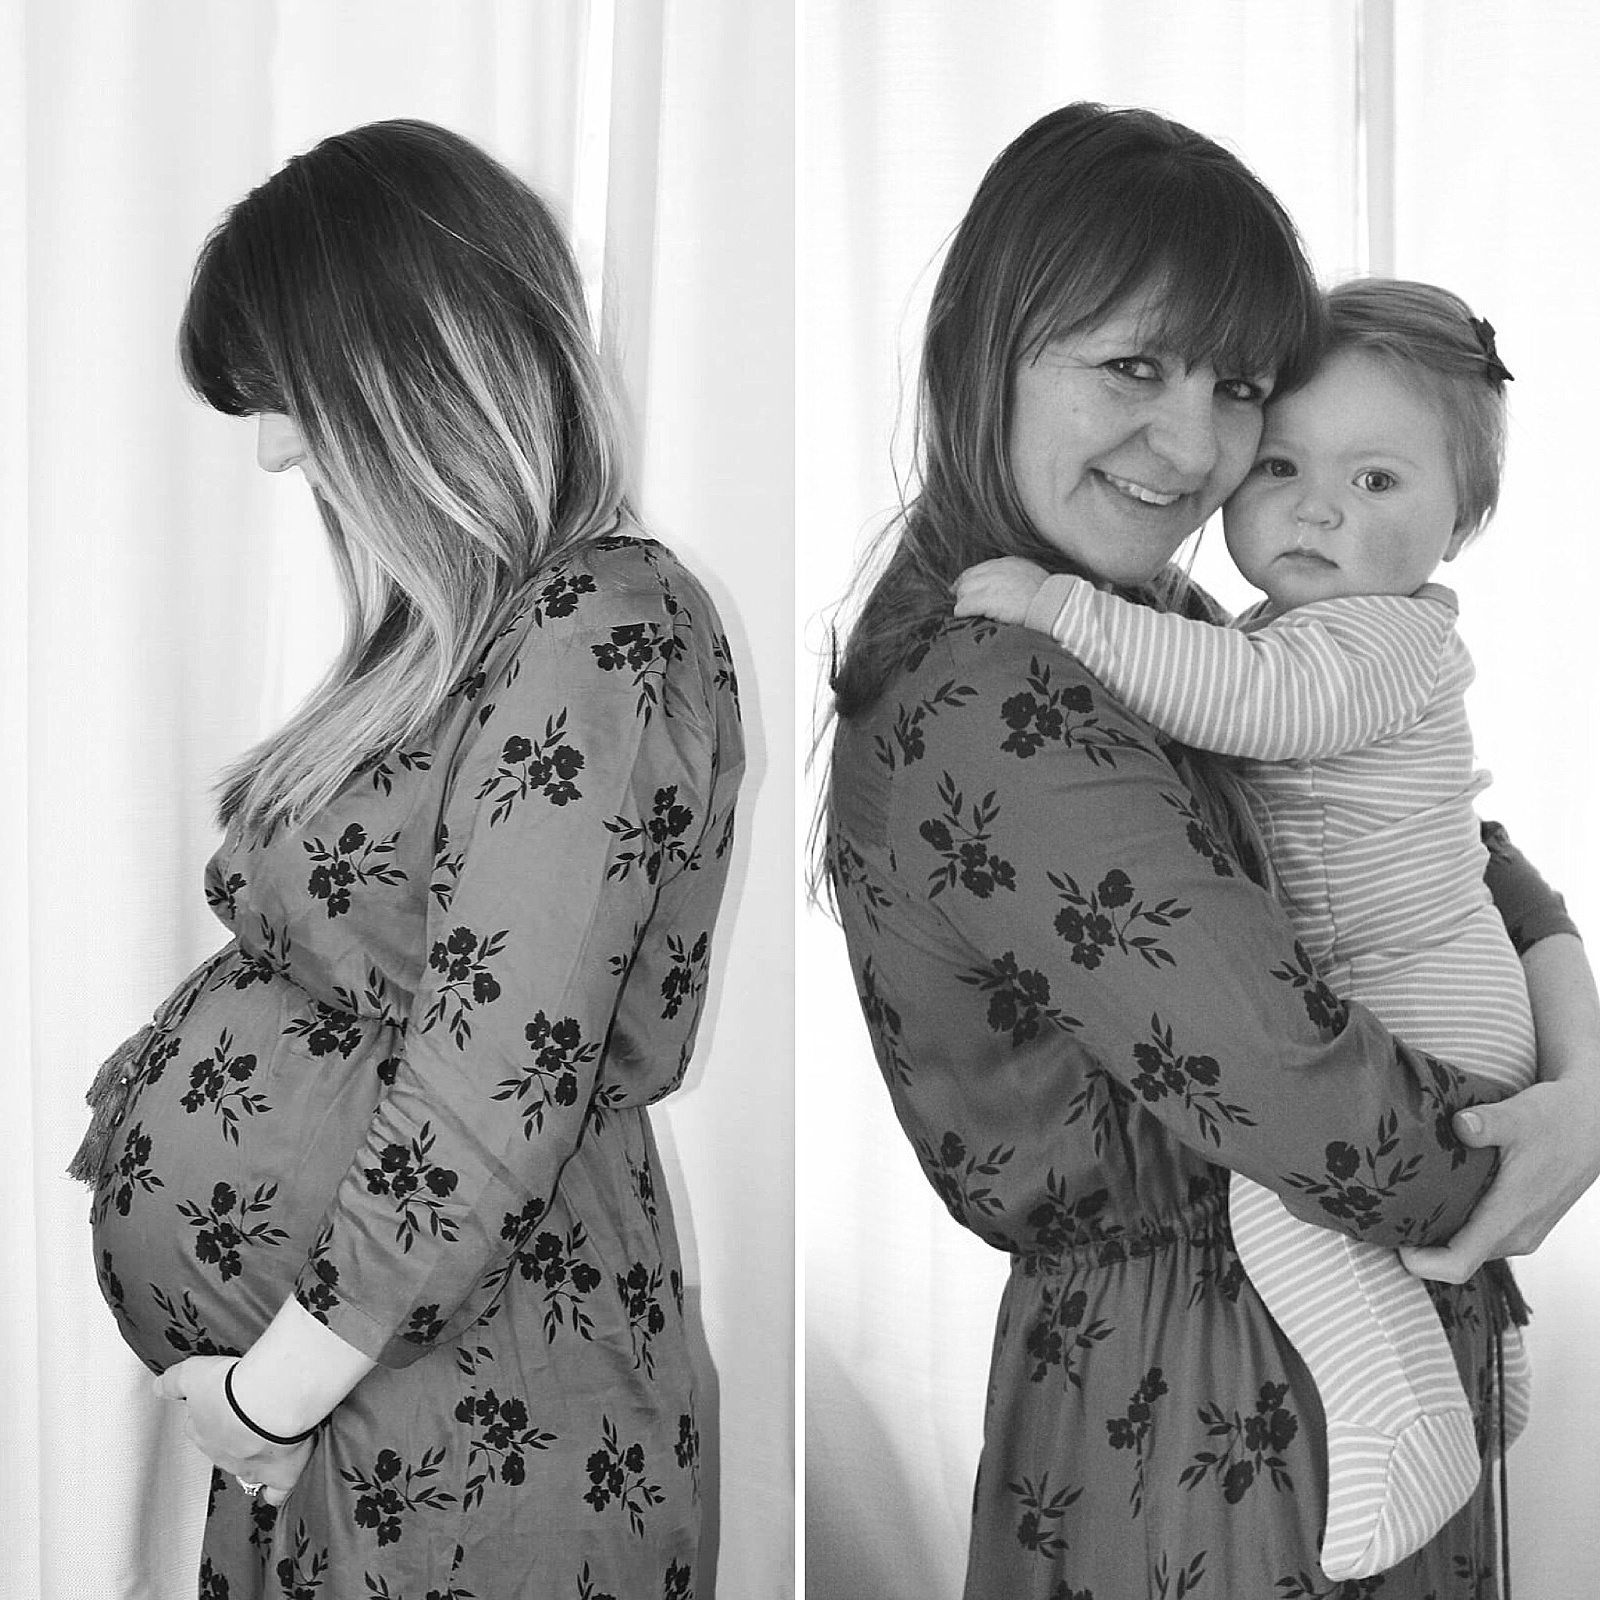 A woman models pregnancy photo ideas by putting two pictures side by side - one of herself nine months pregnant and one of her holding her nine month old baby.